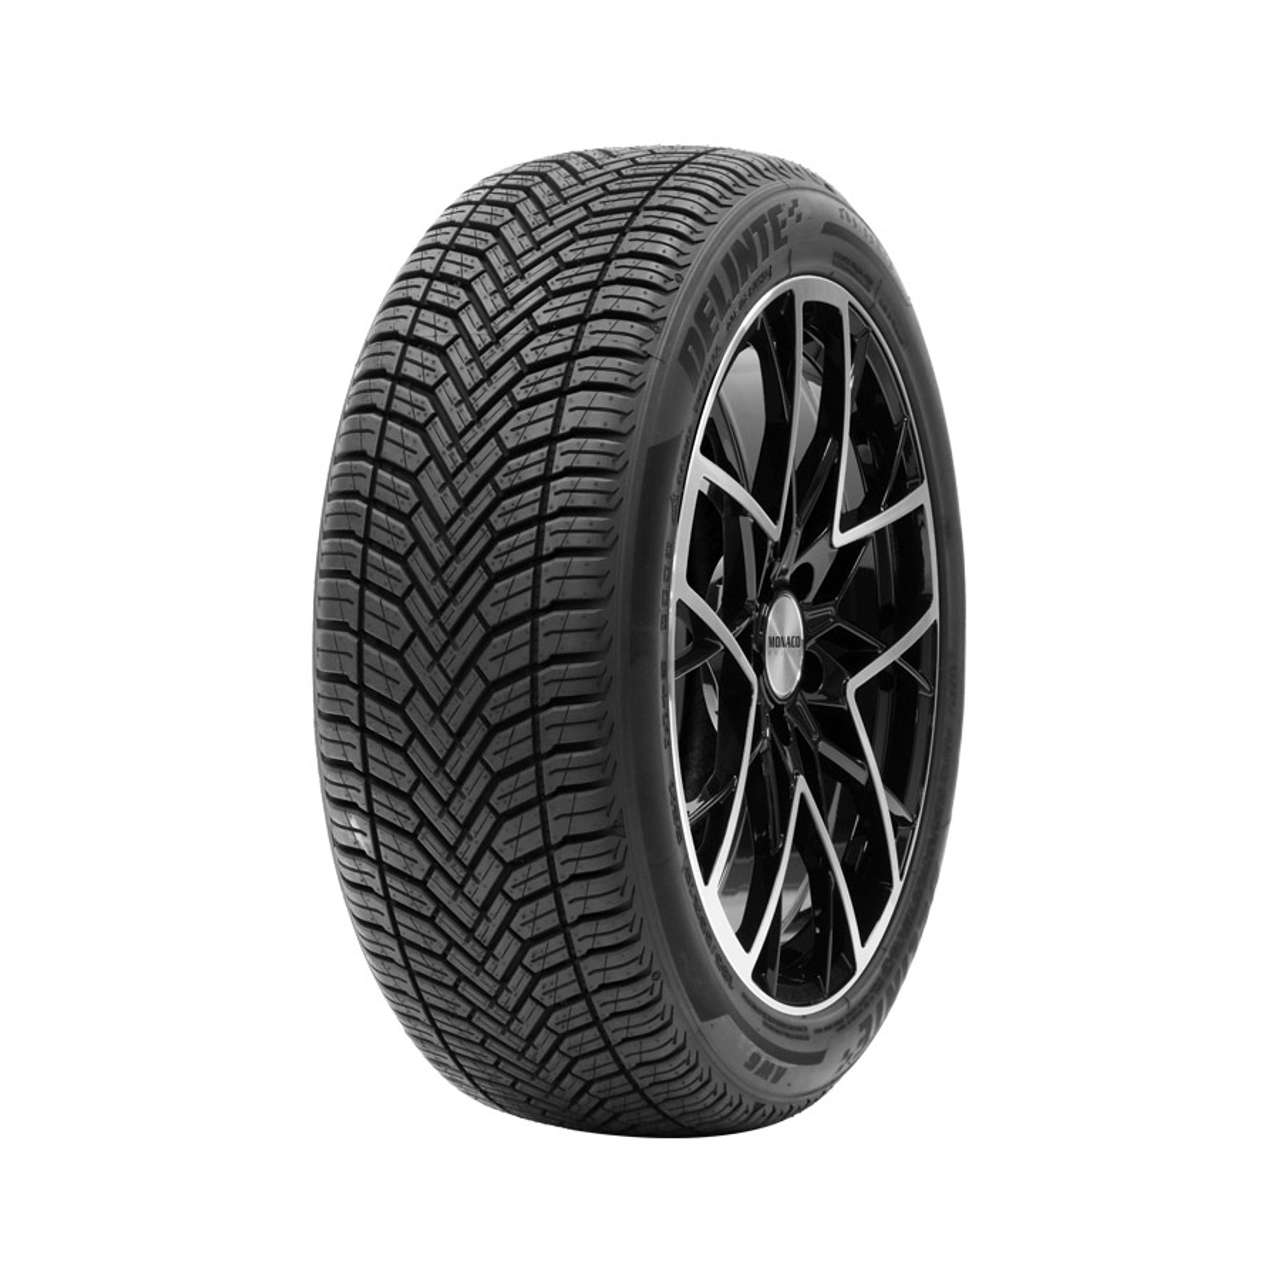 DELINTE AW6 165/60R14 75H BSW